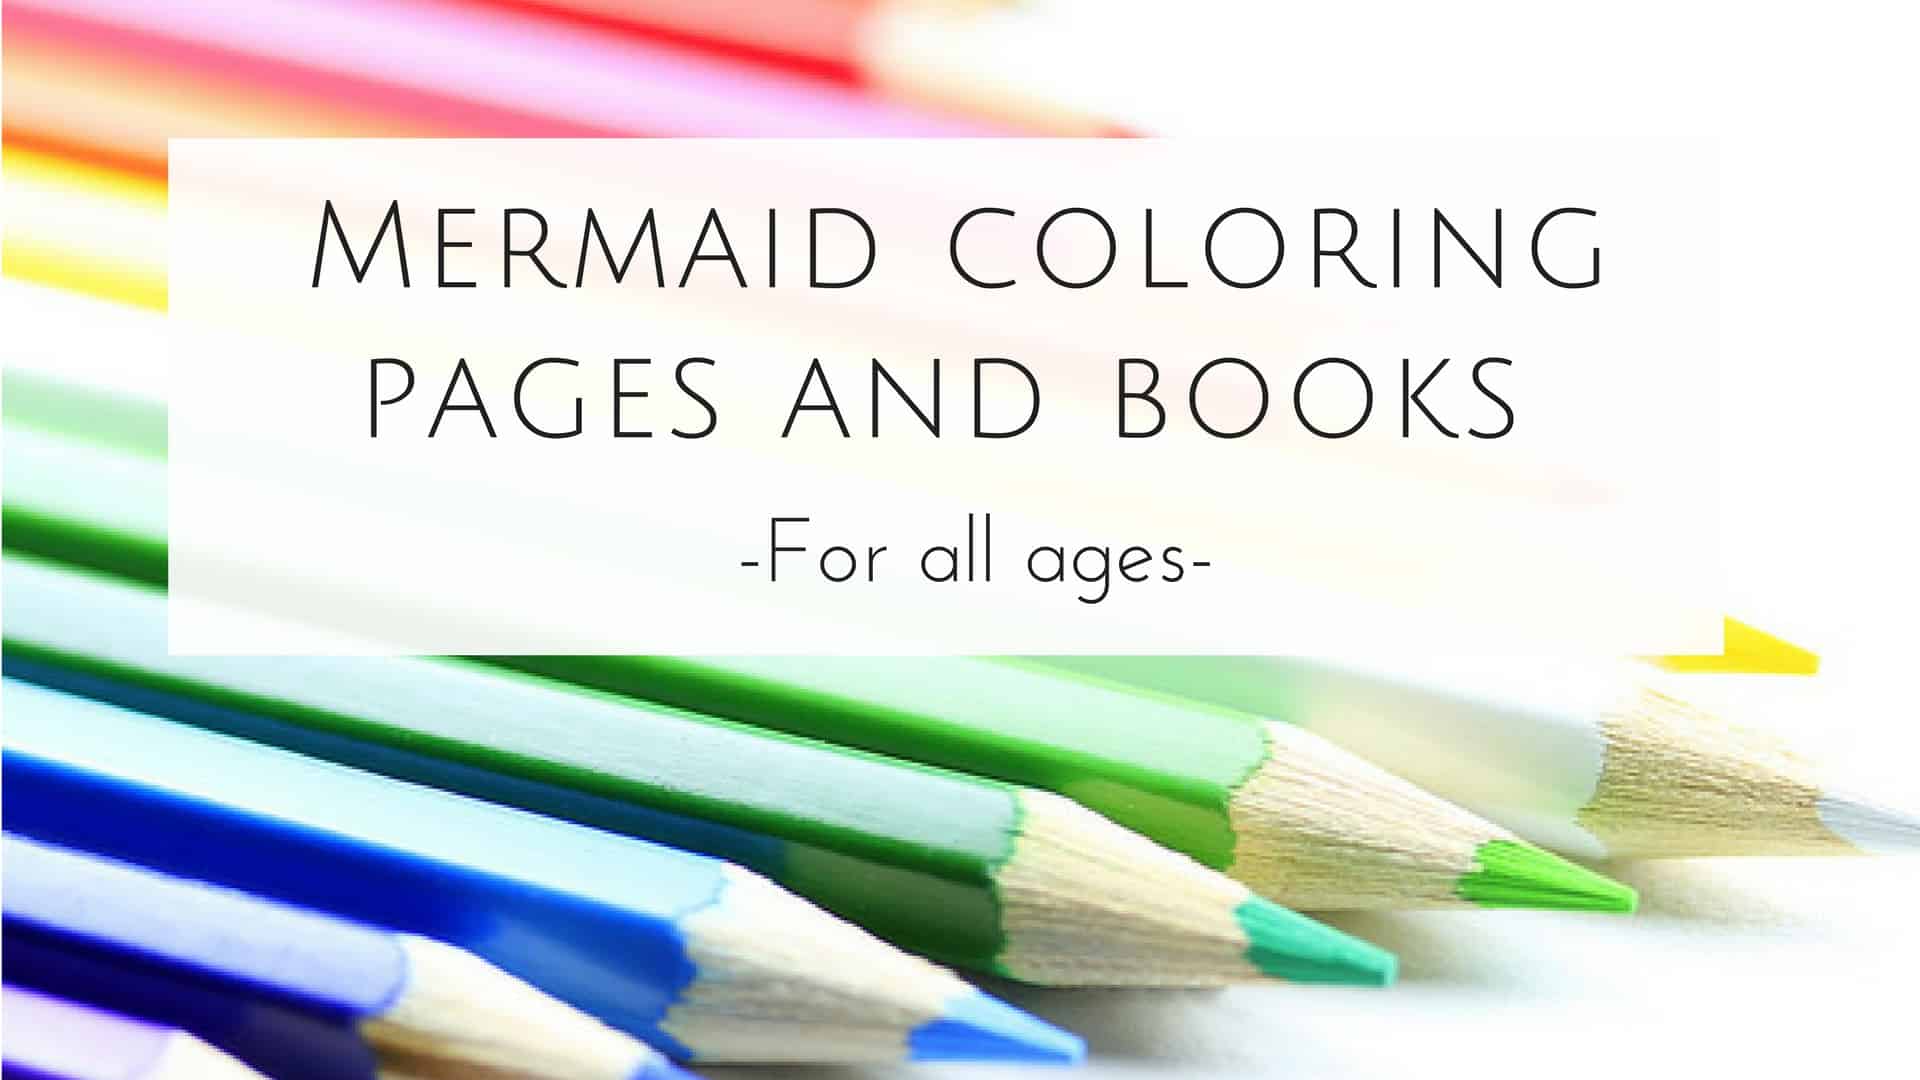 mermaid coloring pages and books for adults and children